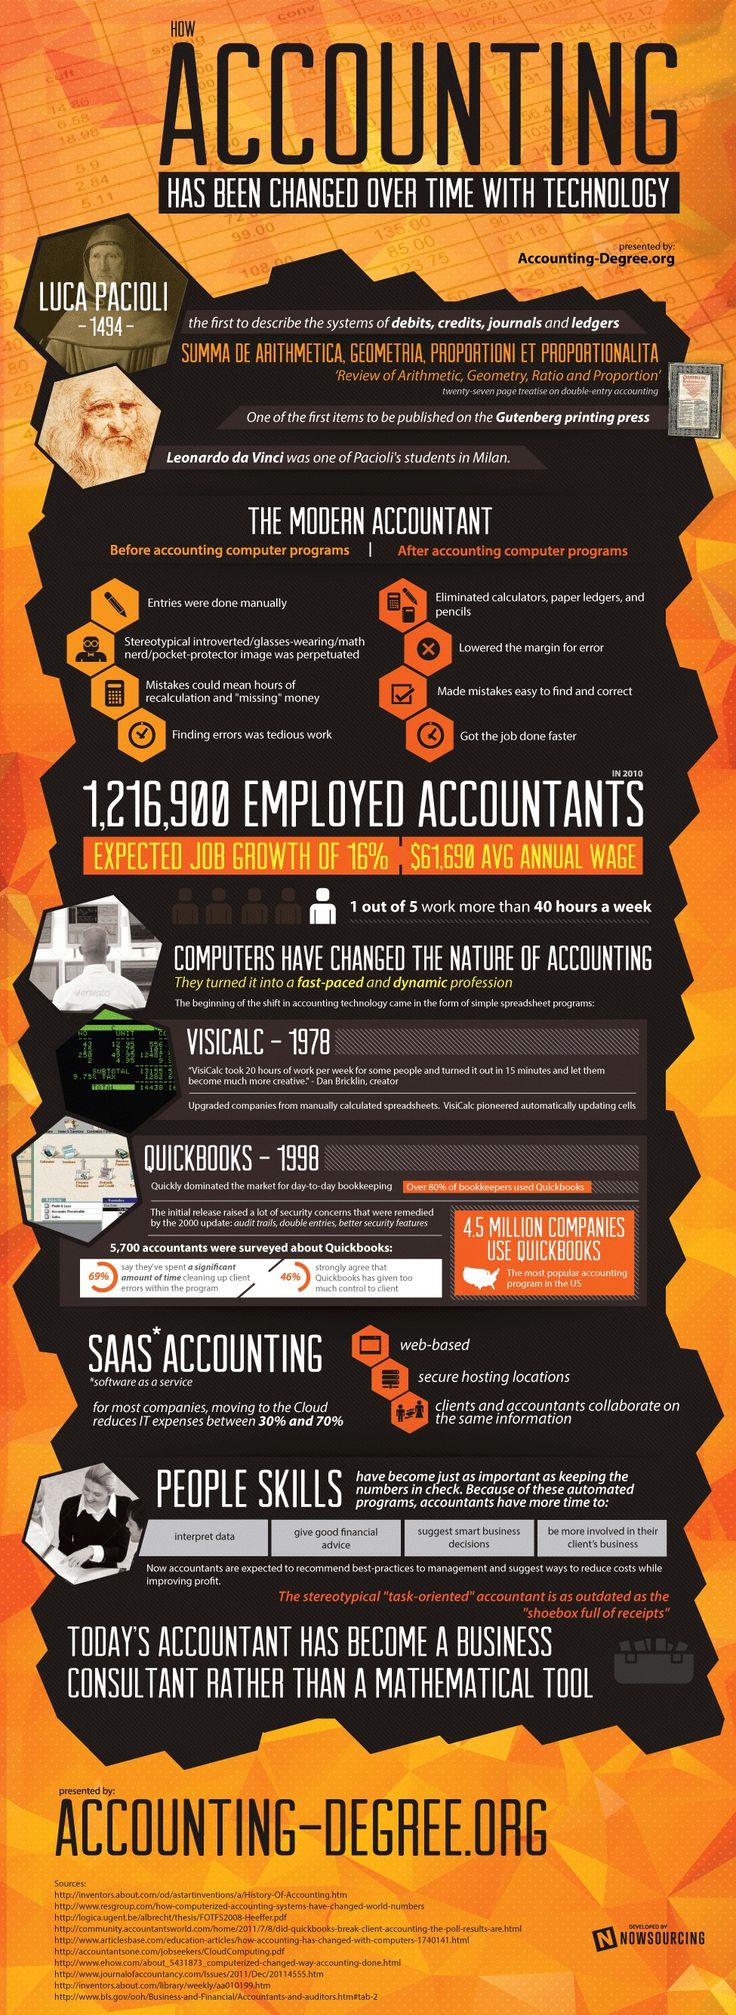 A Guide to Accounting
